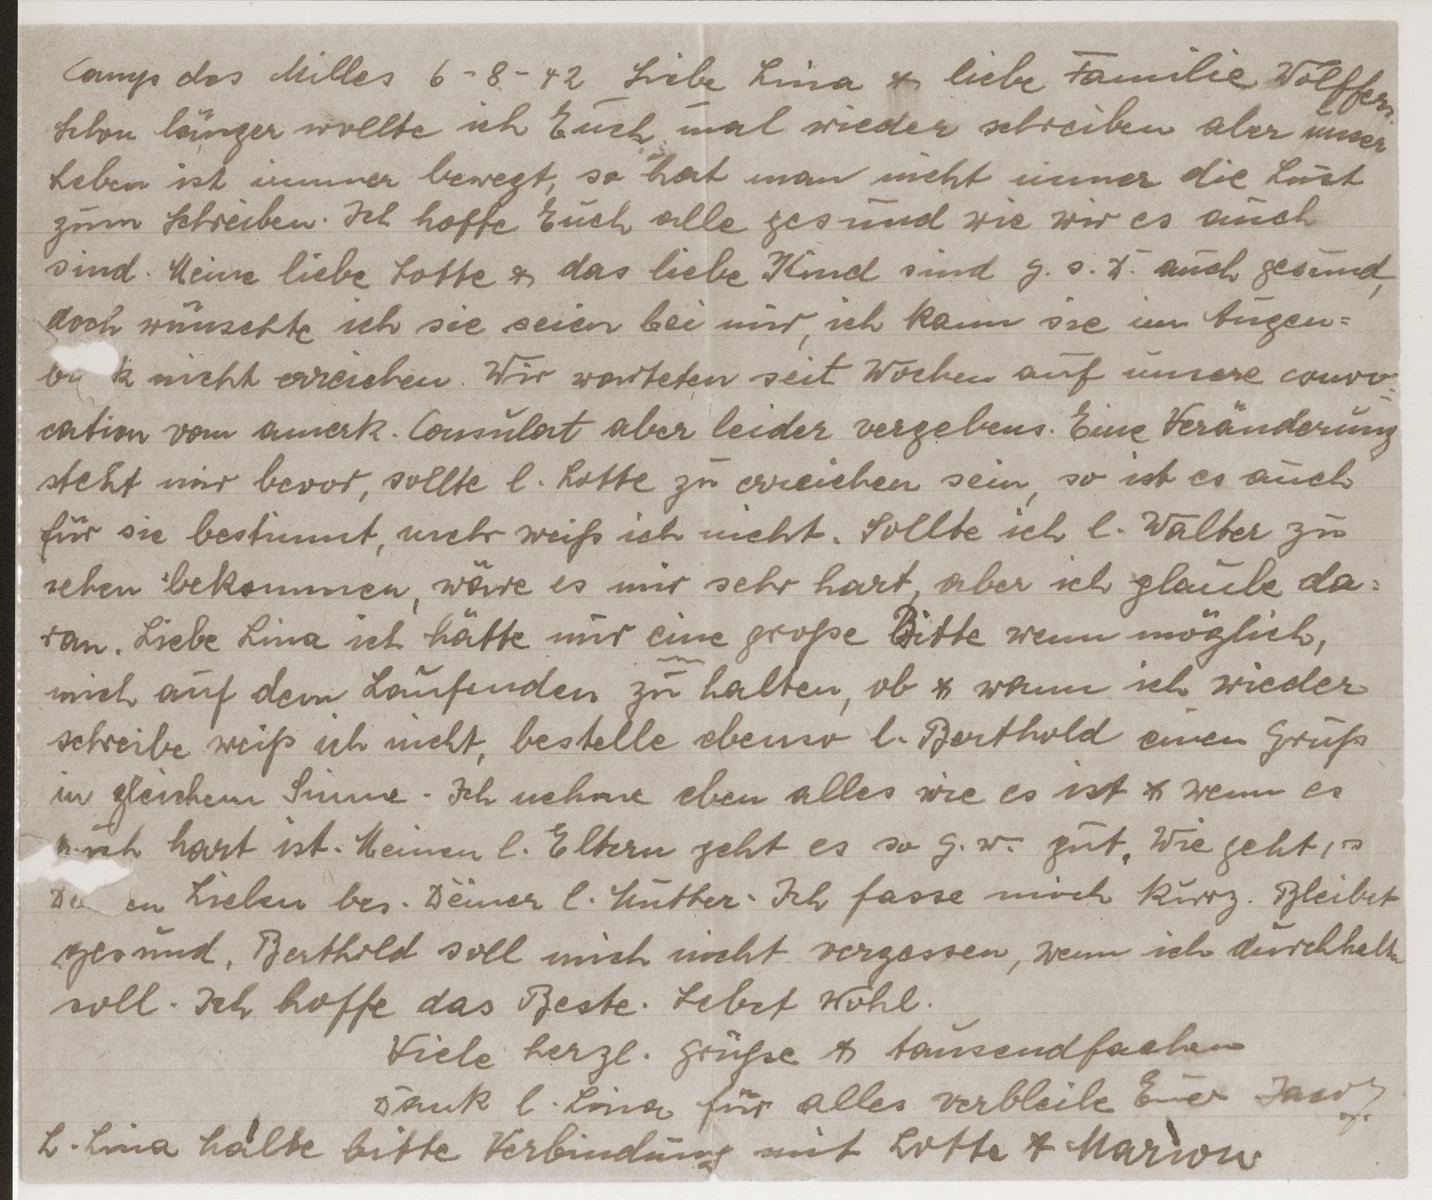 The last letter written by Jakob Michel from the Les Milles camp, addressed to Mrs. Wolffer, a woman in Switzerland who came from the same German village as Jakob.    

In the letter Jakob asks her to look after his family.  When Marion was sent to Switzerland by the OSE, Mrs. Wolffer became her foster mother.